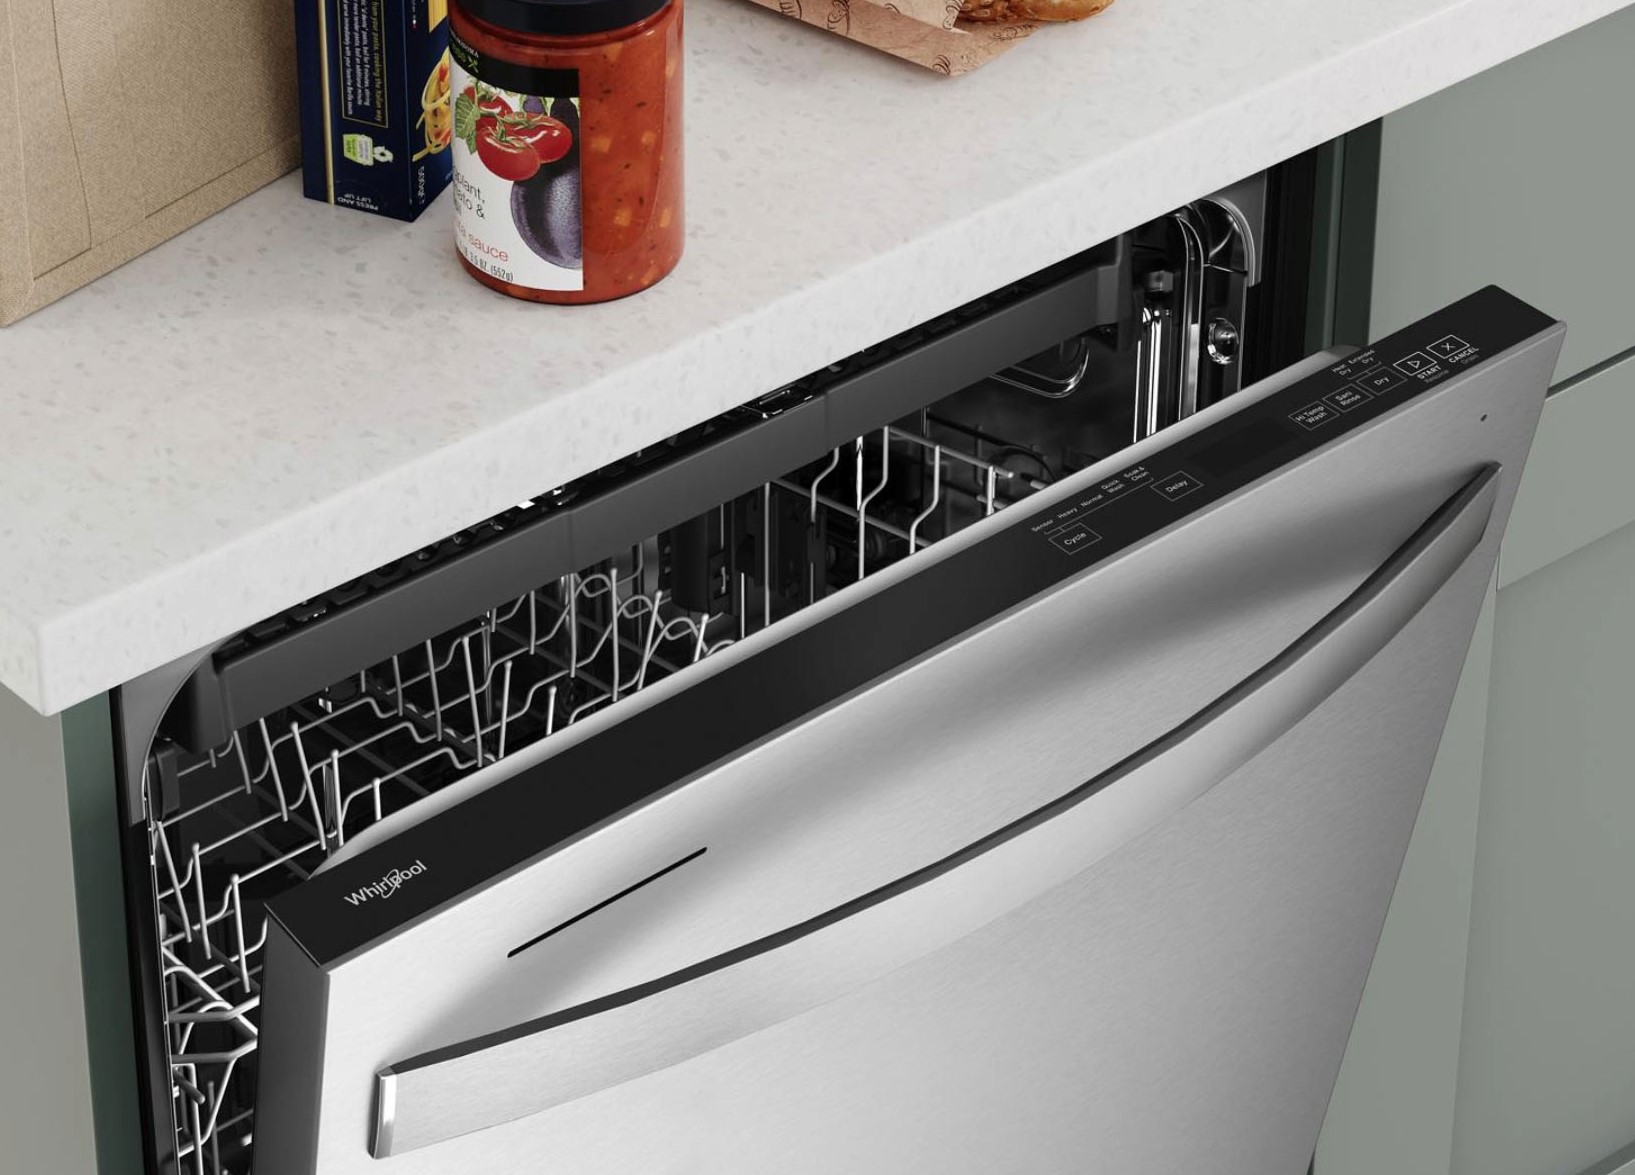 How To Fix The Error Code 45019 For Whirlpool Dishwasher